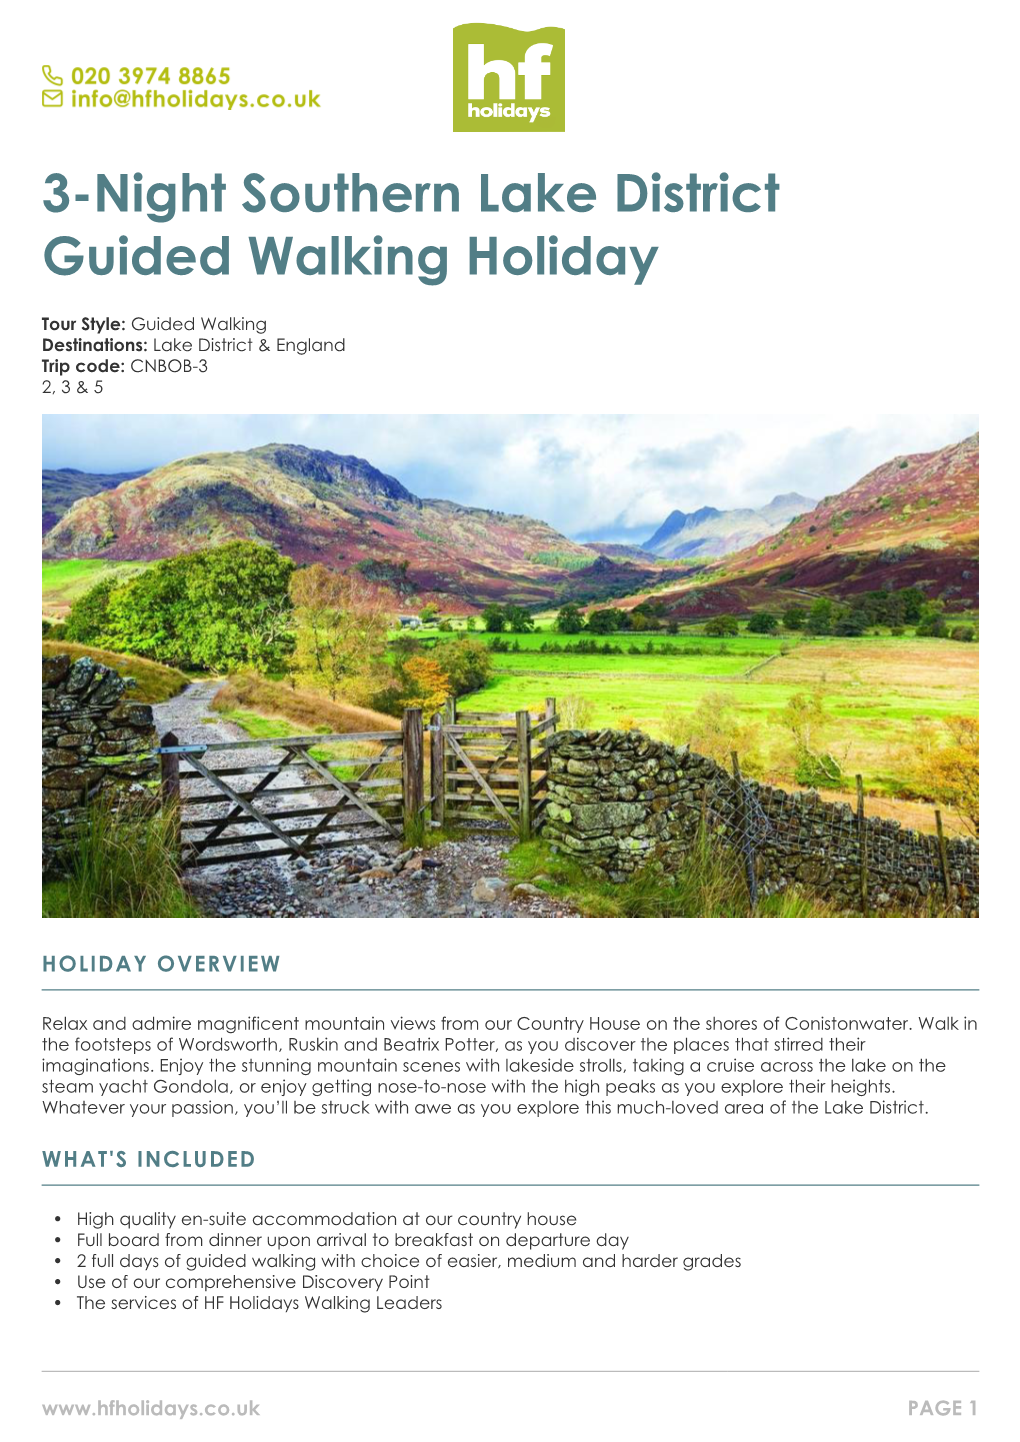 3-Night Southern Lake District Guided Walking Holiday